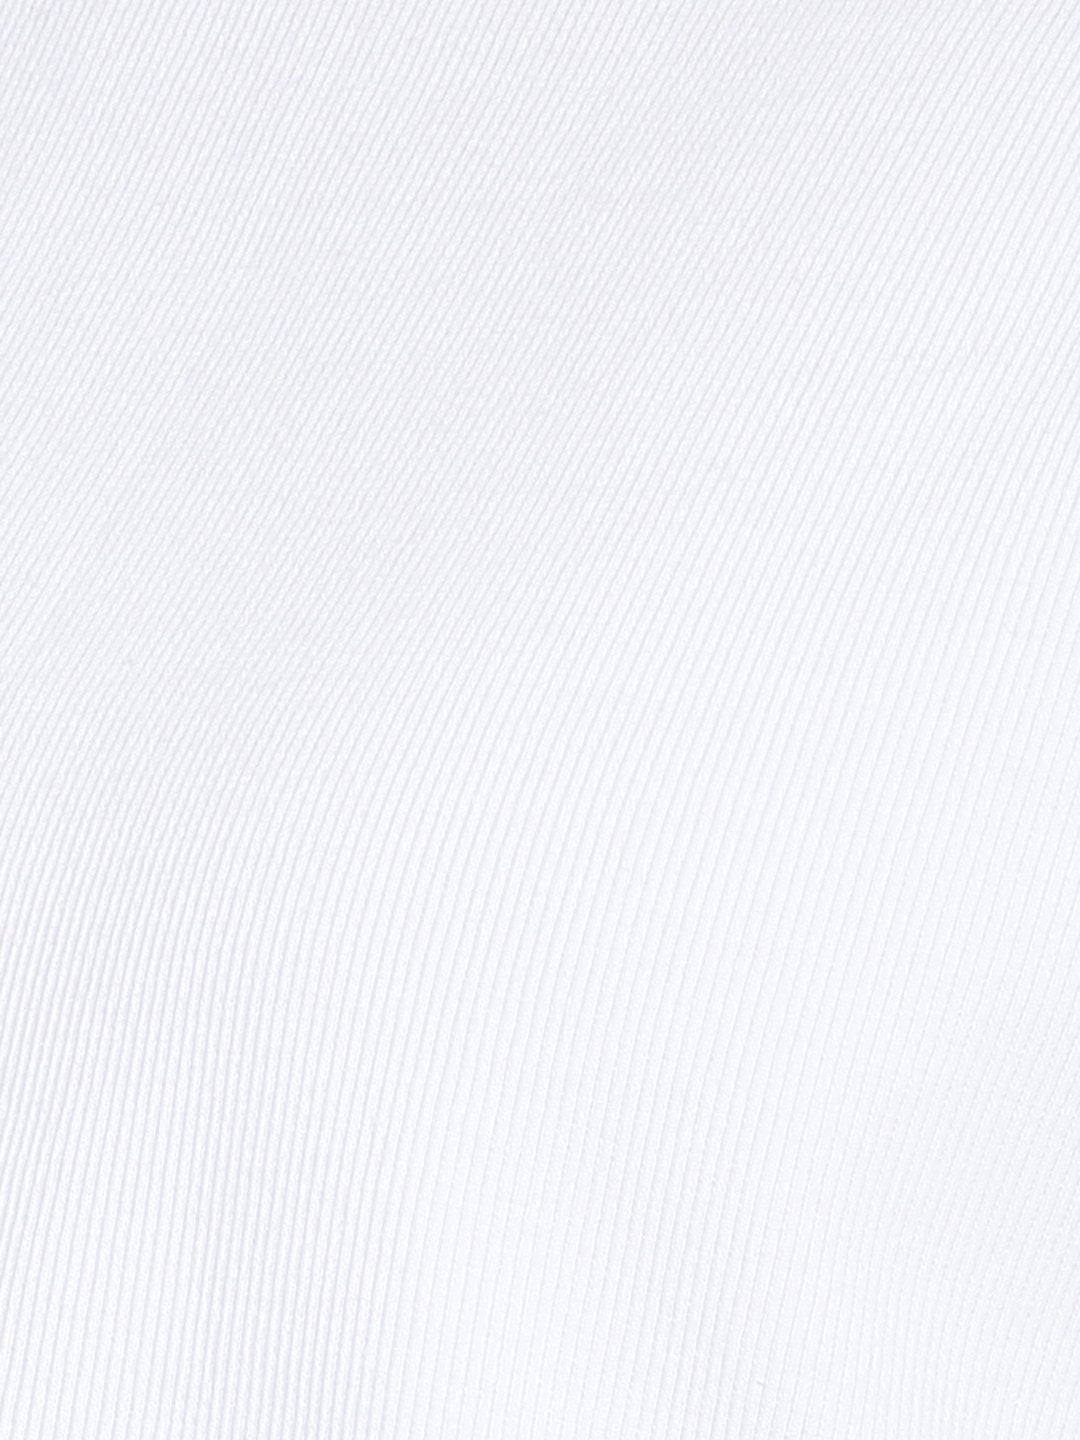 IS.U White Side Button Knit Top